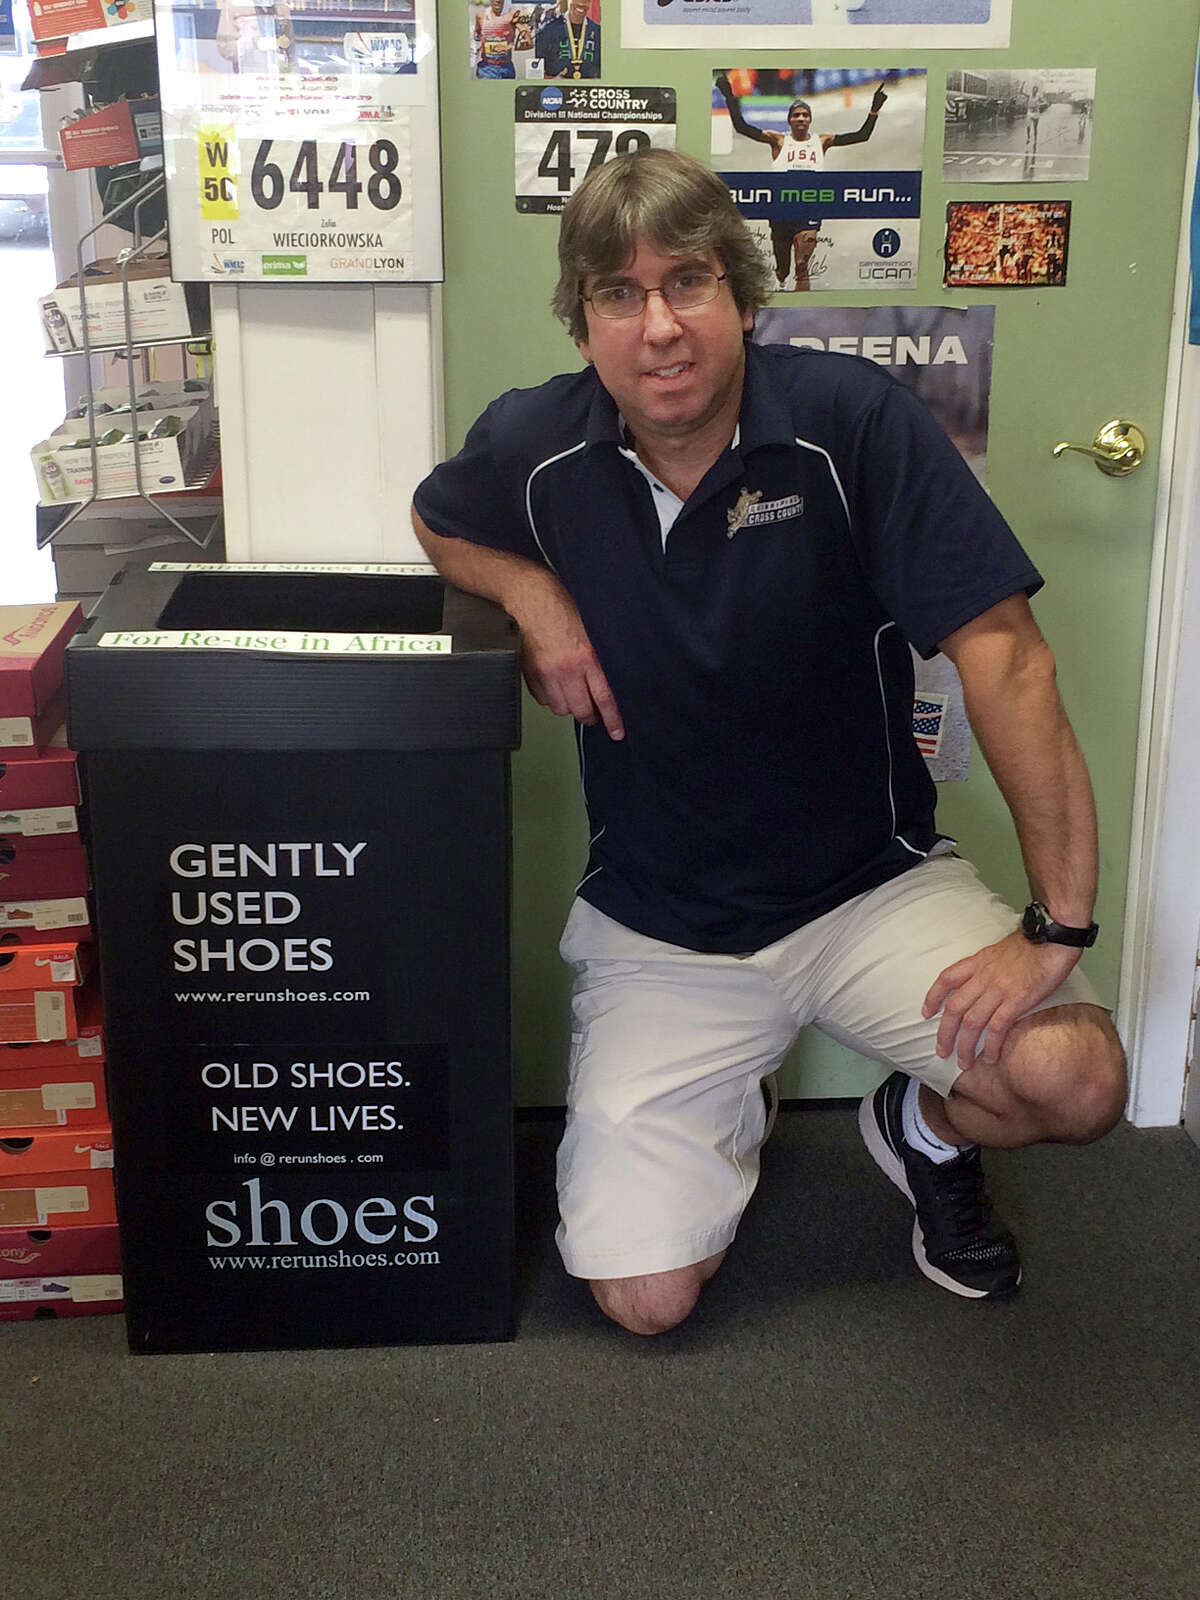 Chris Dickinson of Woodbridge Running Company kneels by one of the collection boxes for old shoes to be donated the Rerun Shoes program.